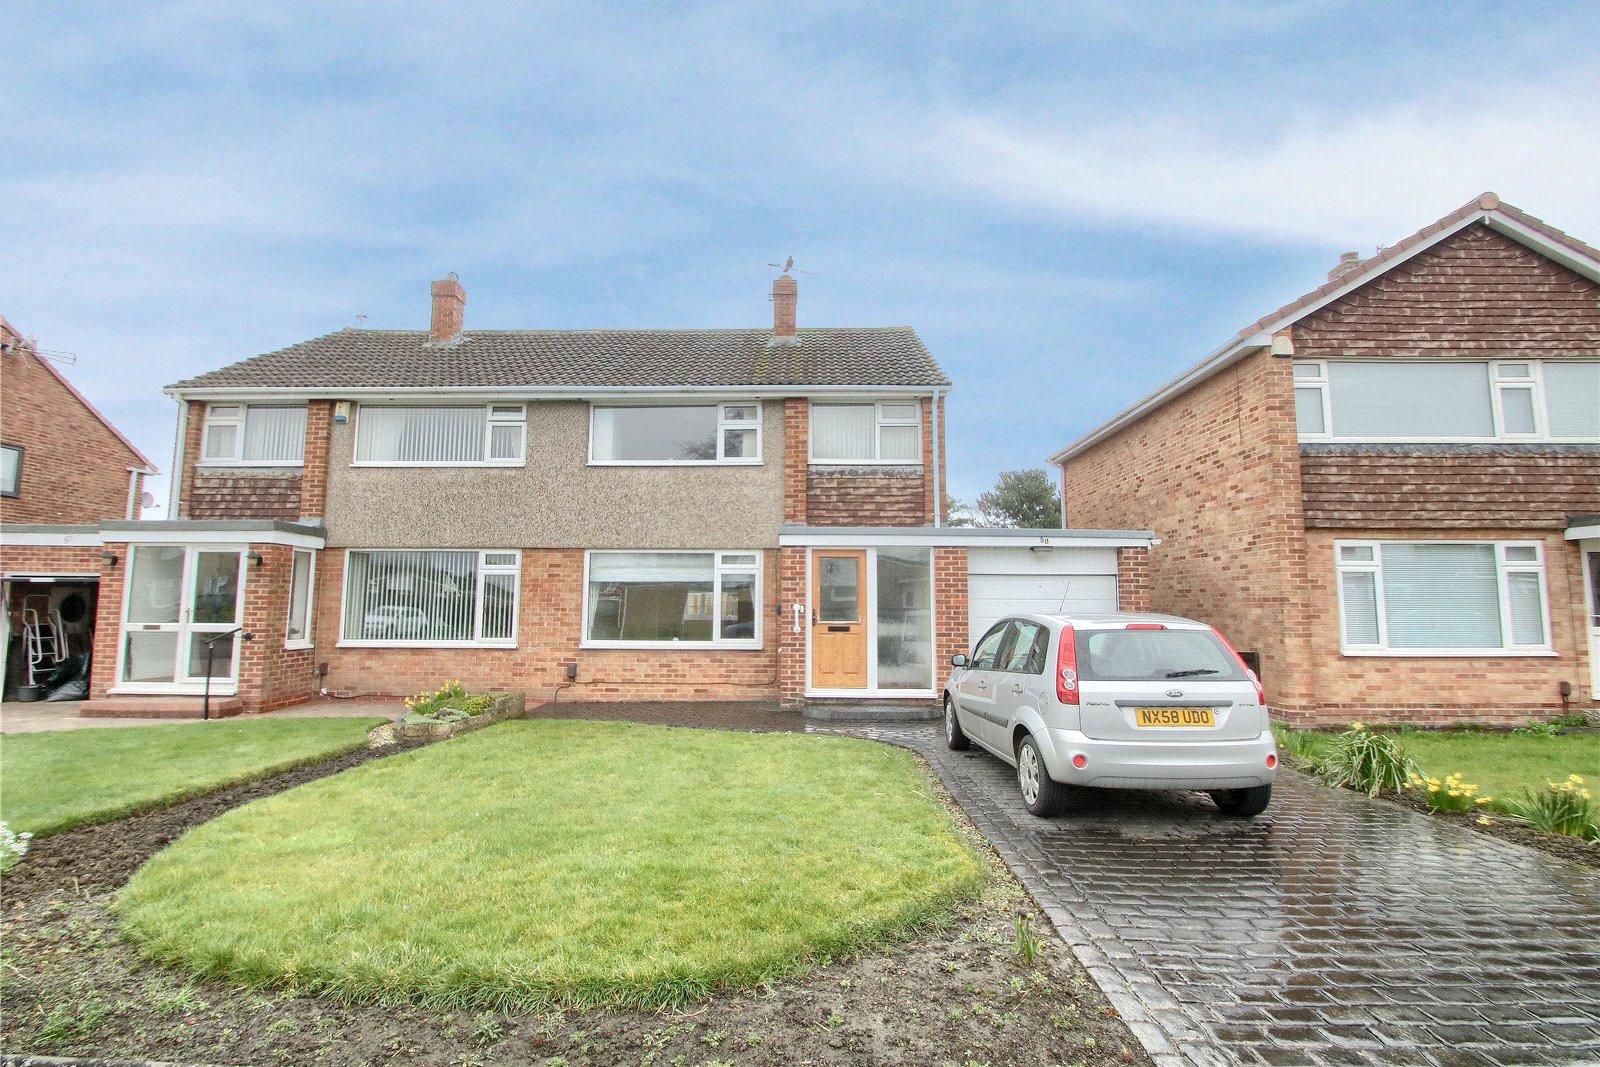 3 bed house for sale in Meadowfield Drive, Eaglescliffe - Property Image 1